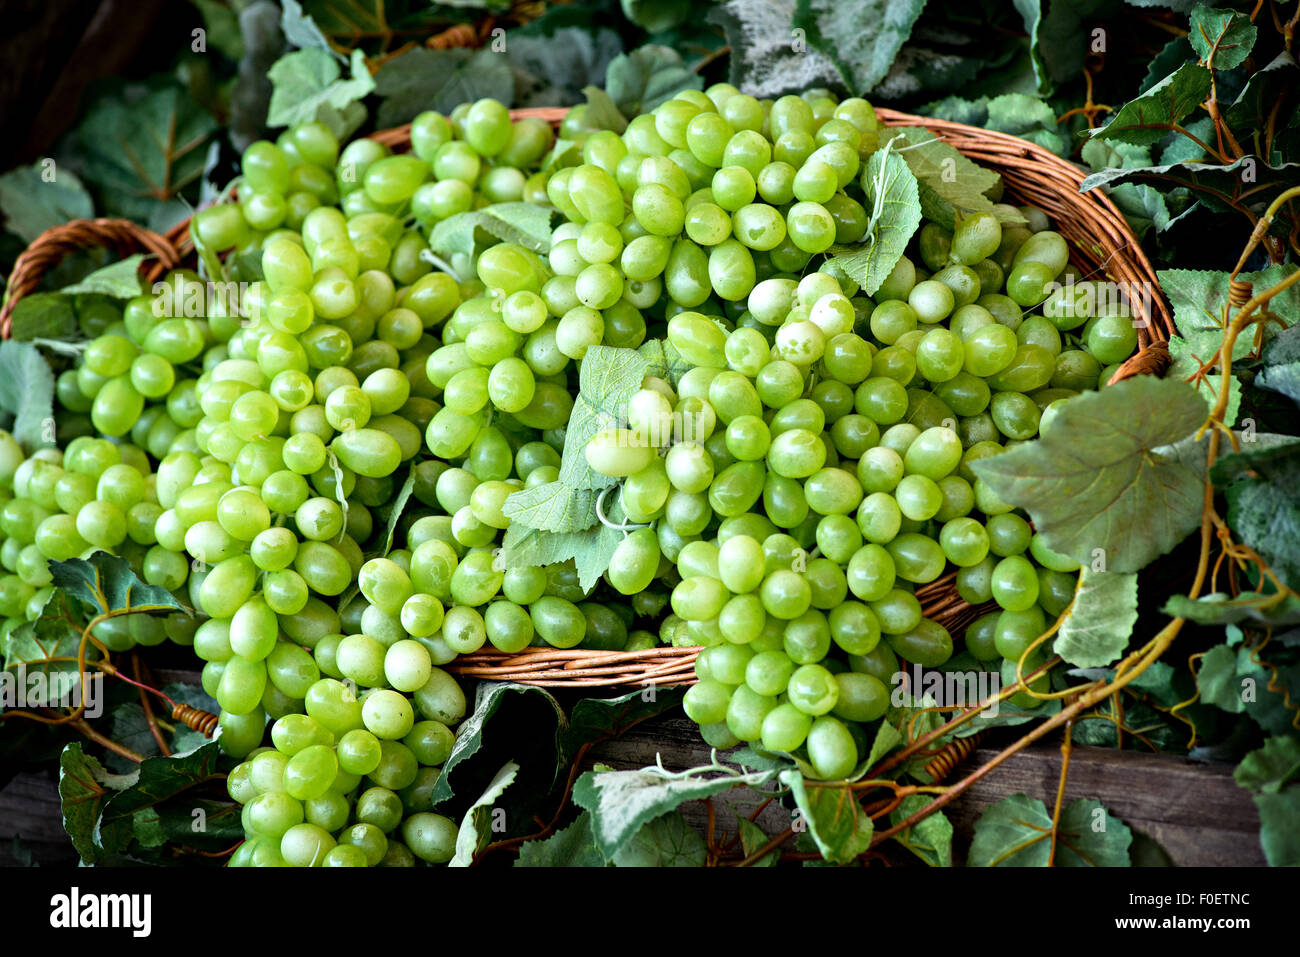 Display of bunches of fresh white or green grapes in a wicker basket Stock Photo